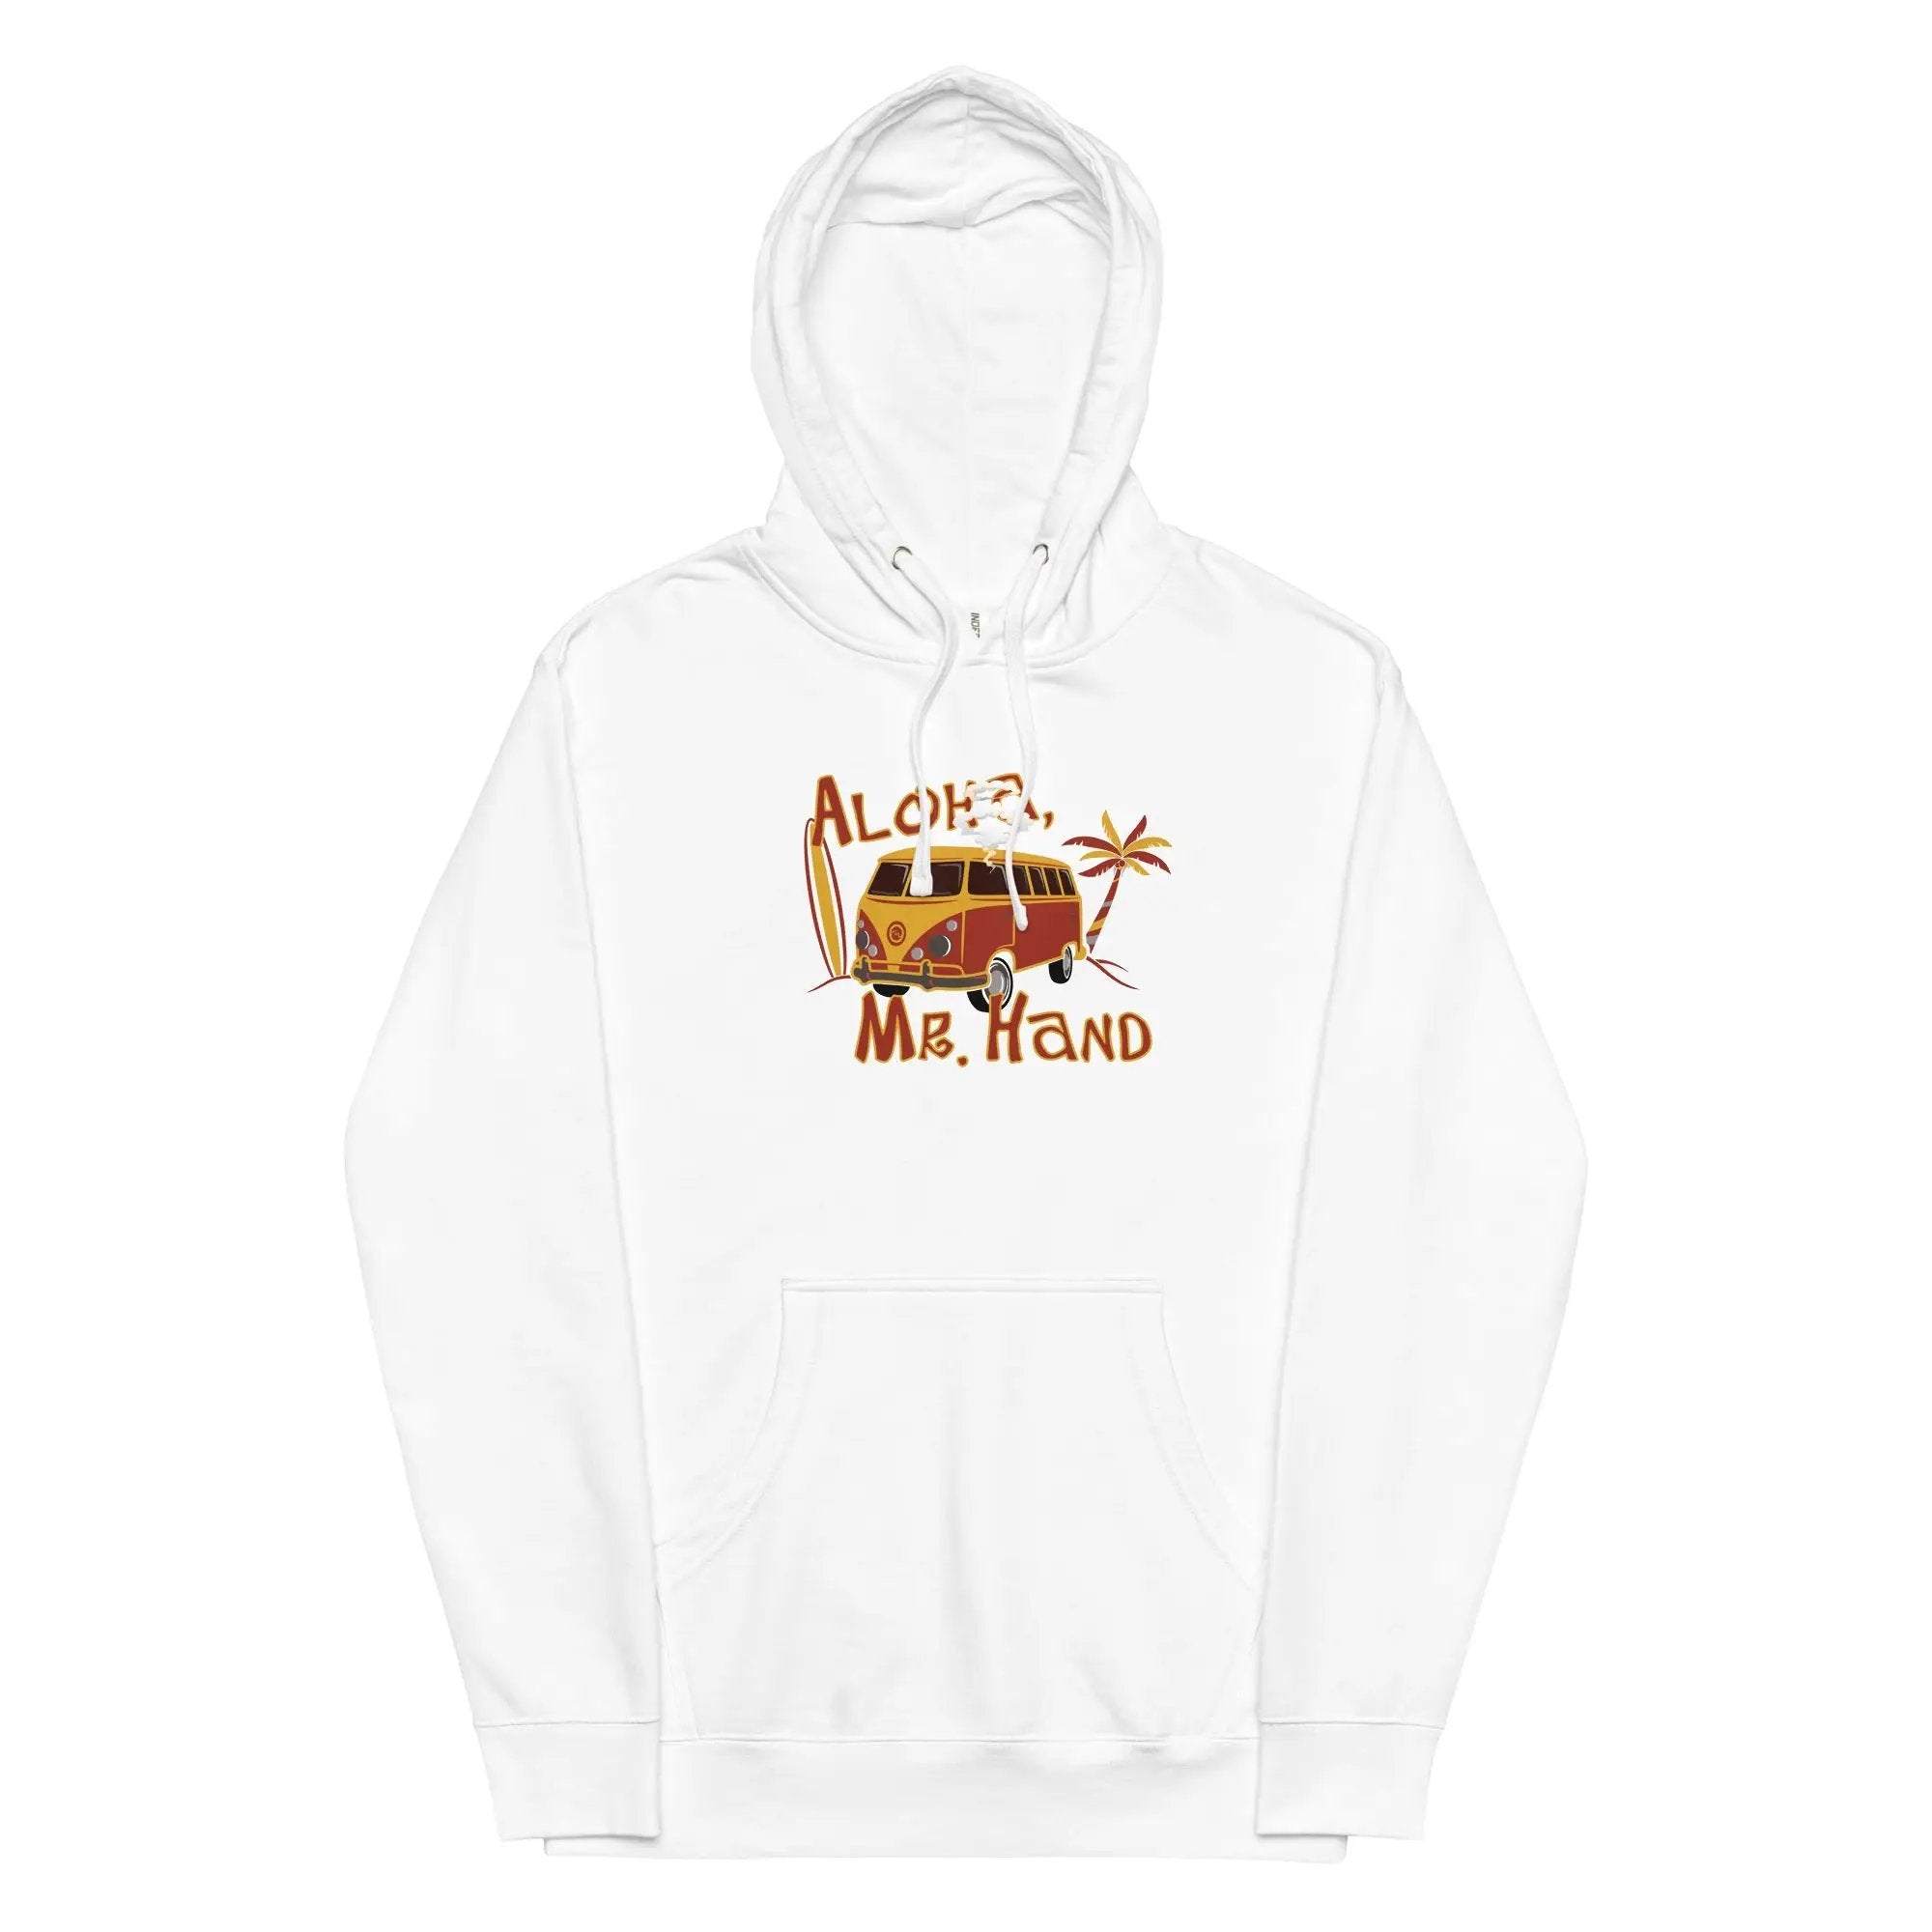 an orange hoodie with an image of a van on it